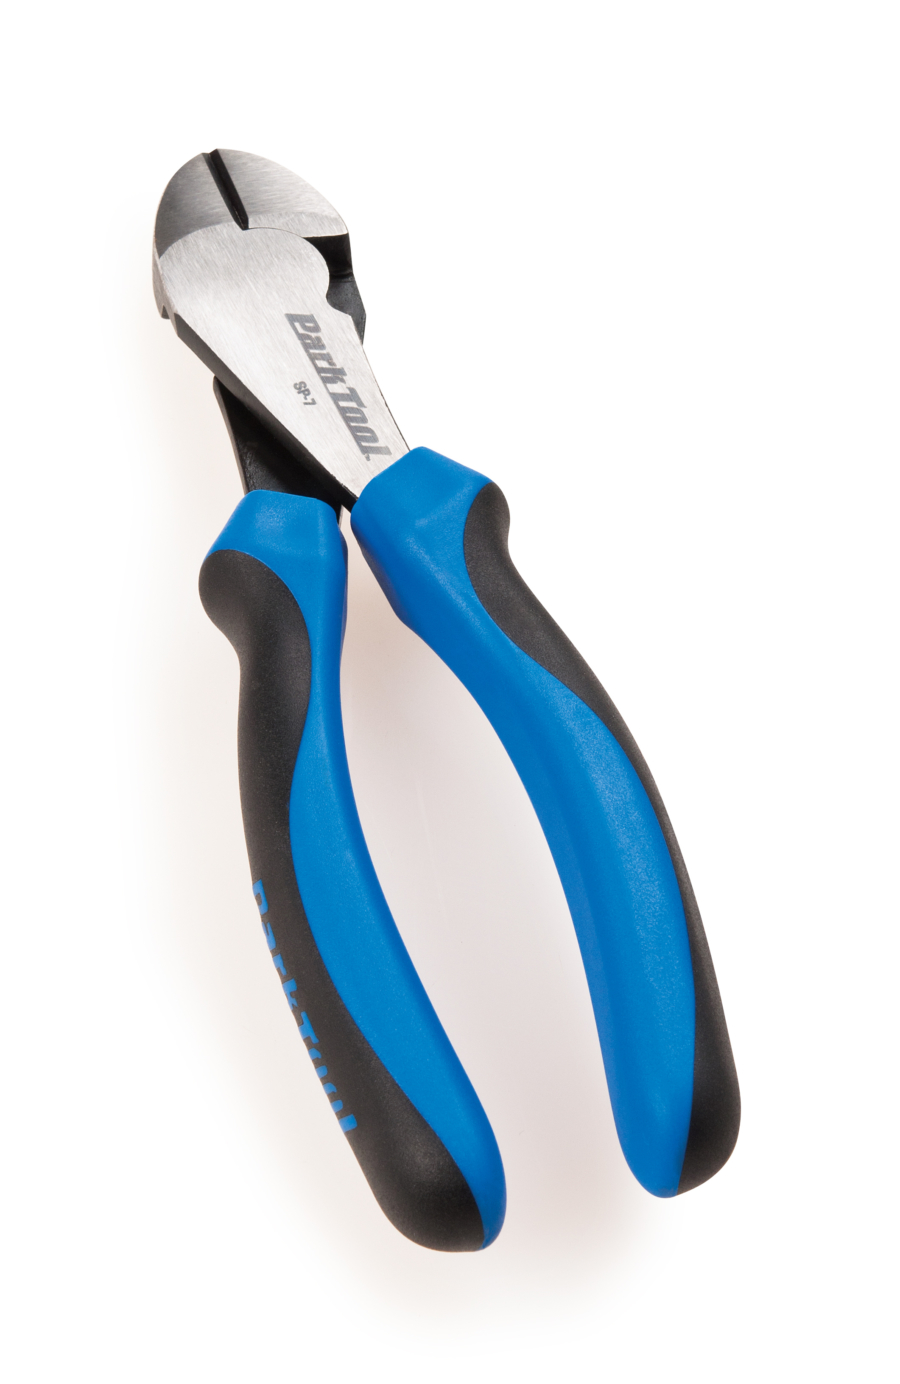 The Park Tool SP-7 Side Cutter Pliers face up on white background, enlarged